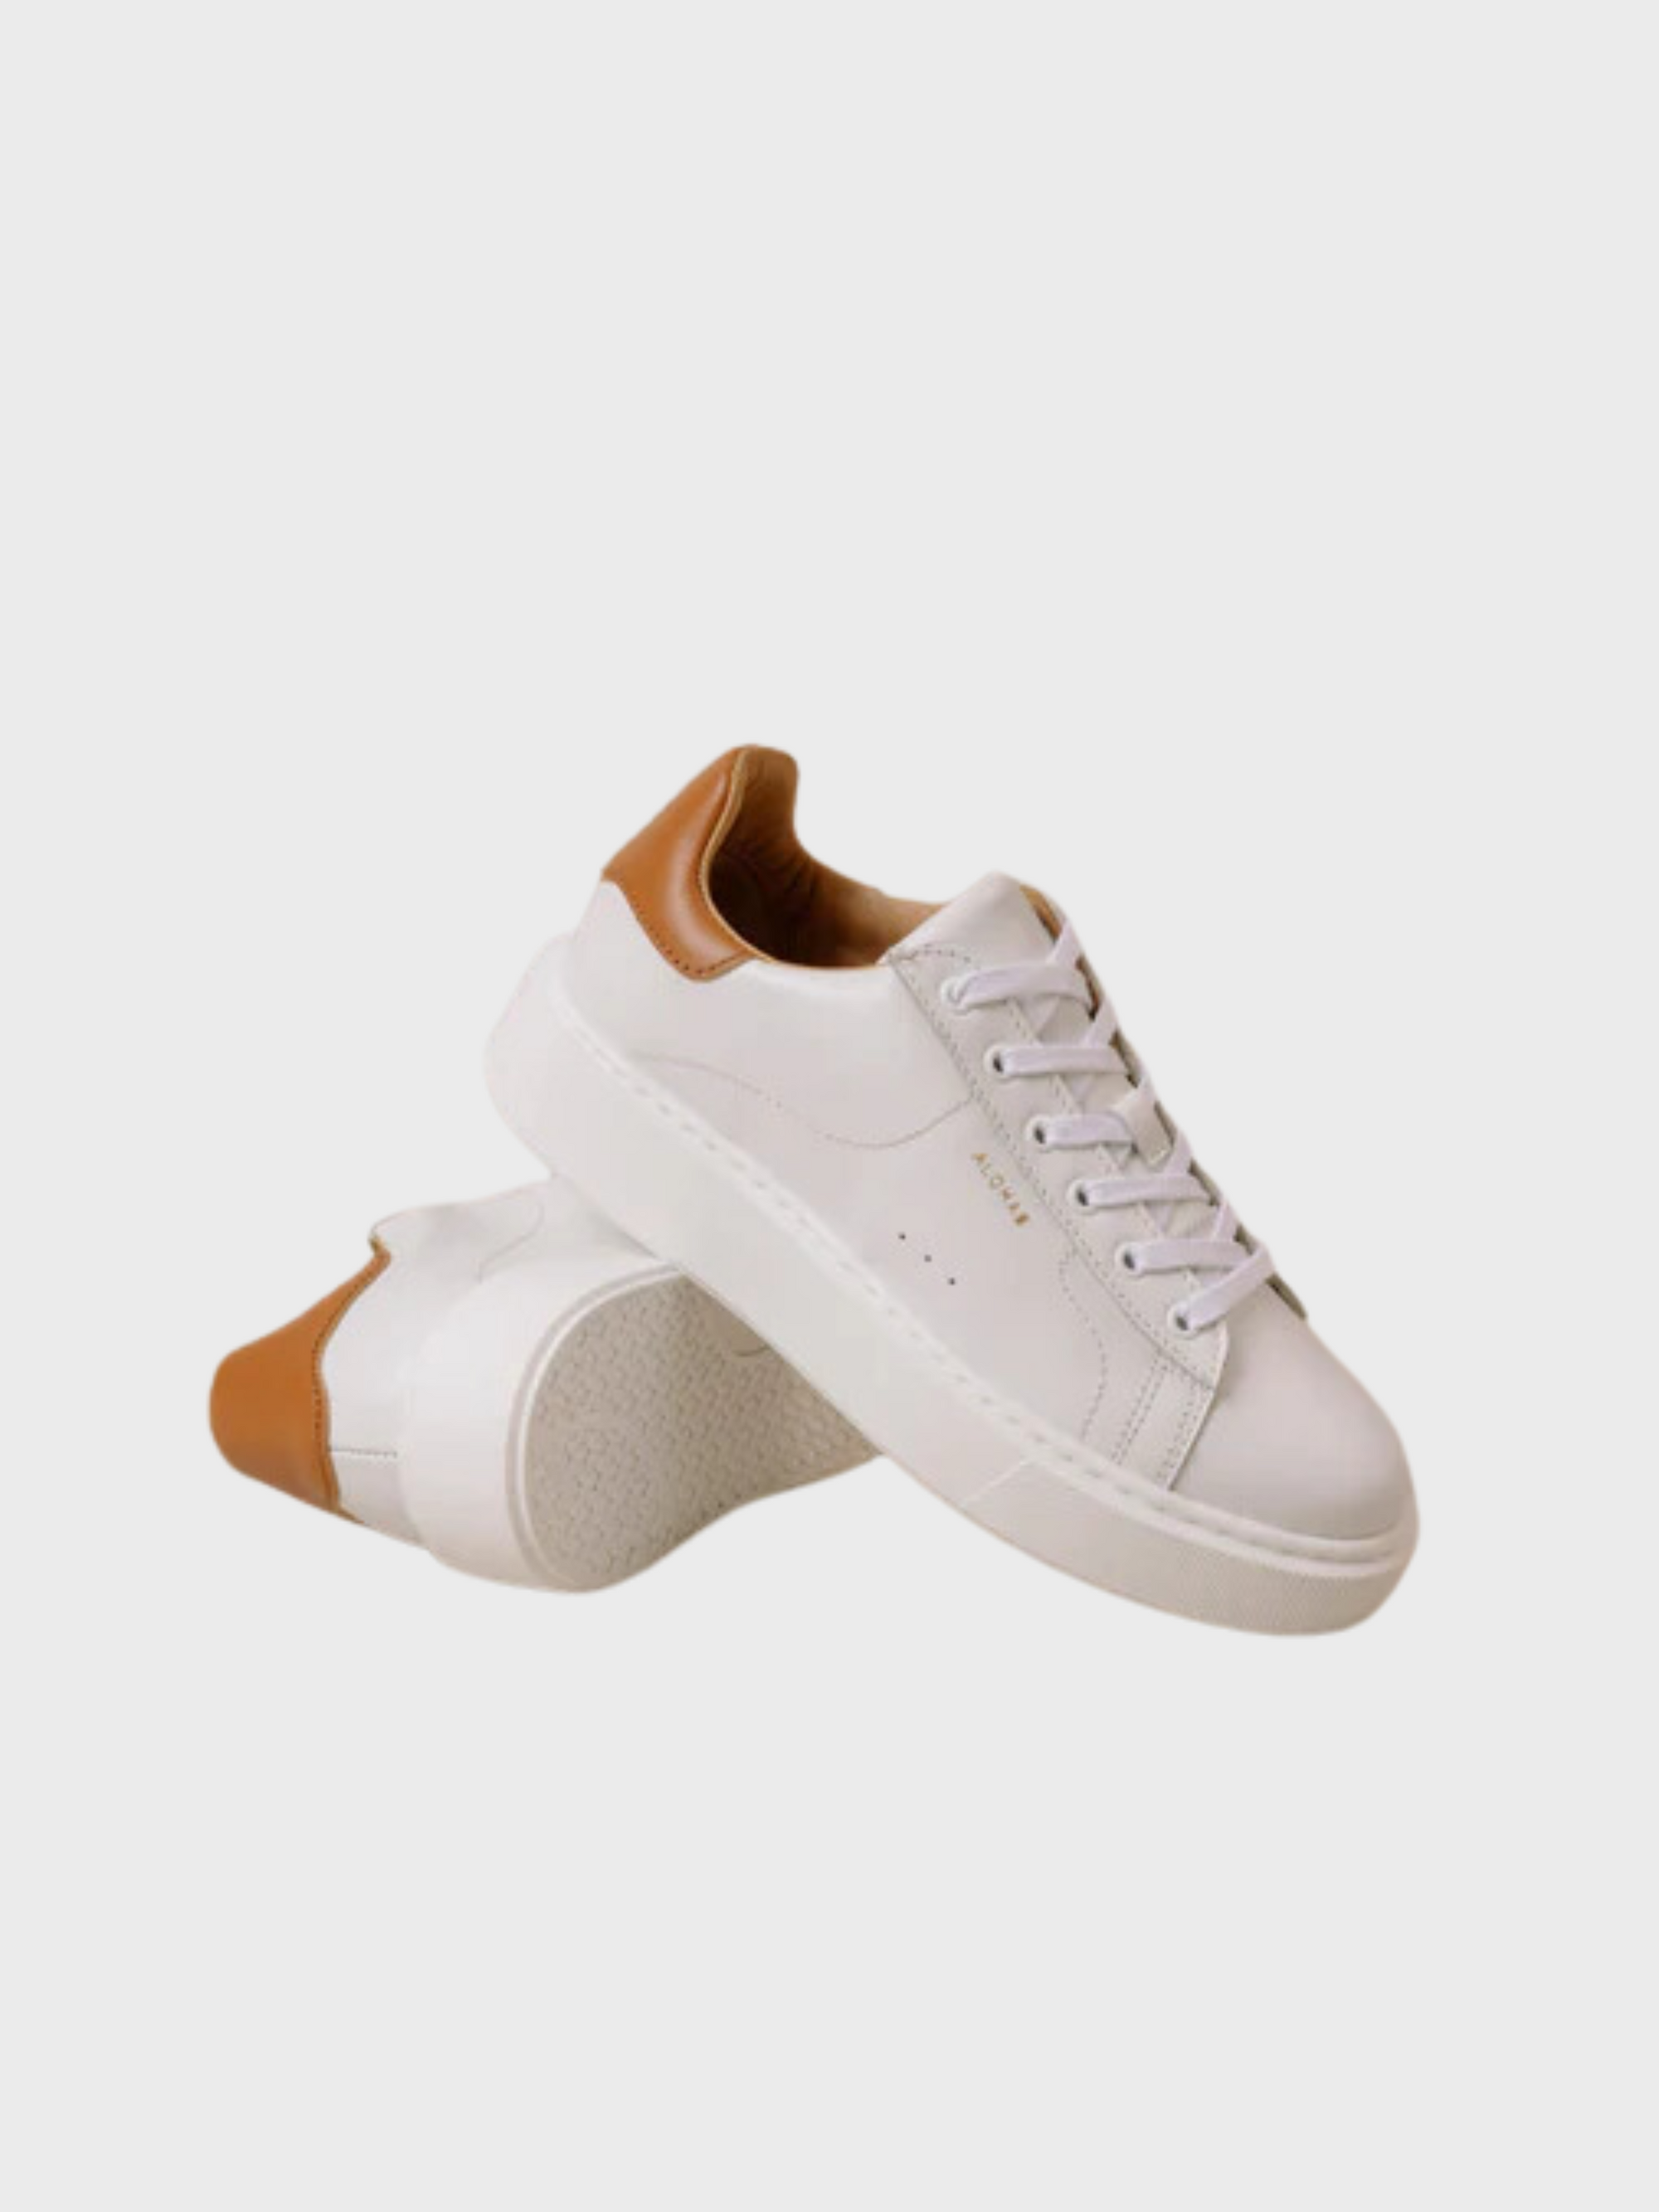 ALOHAS tb.65 Sneakers Bright White Tan-Sneakers-West of Woodward Boutique-Vancouver-Canada